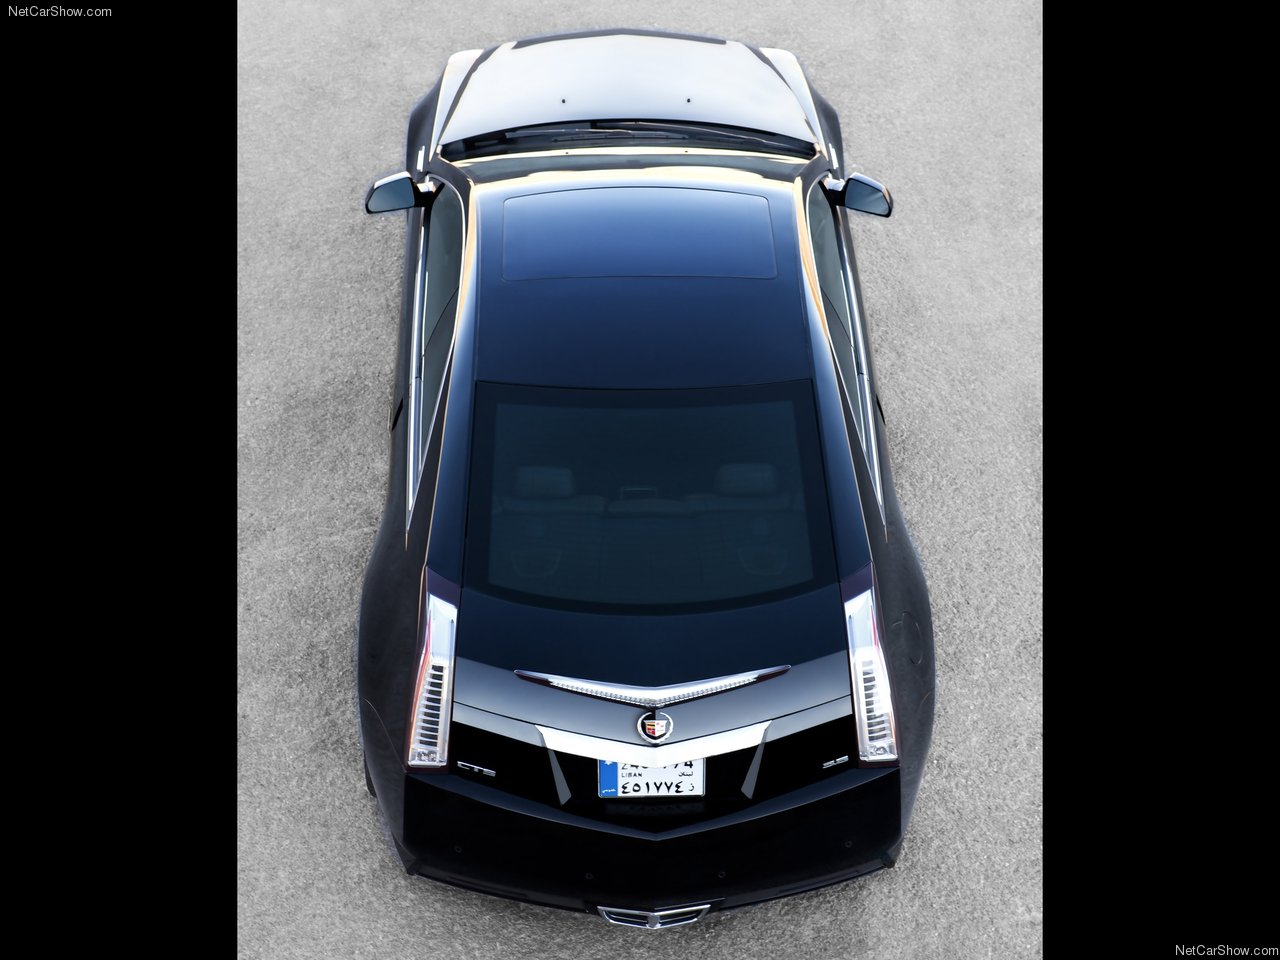 Cadillac CTS Coupe 2011 Cadillac-CTS_Coupe-2011-1280-2f